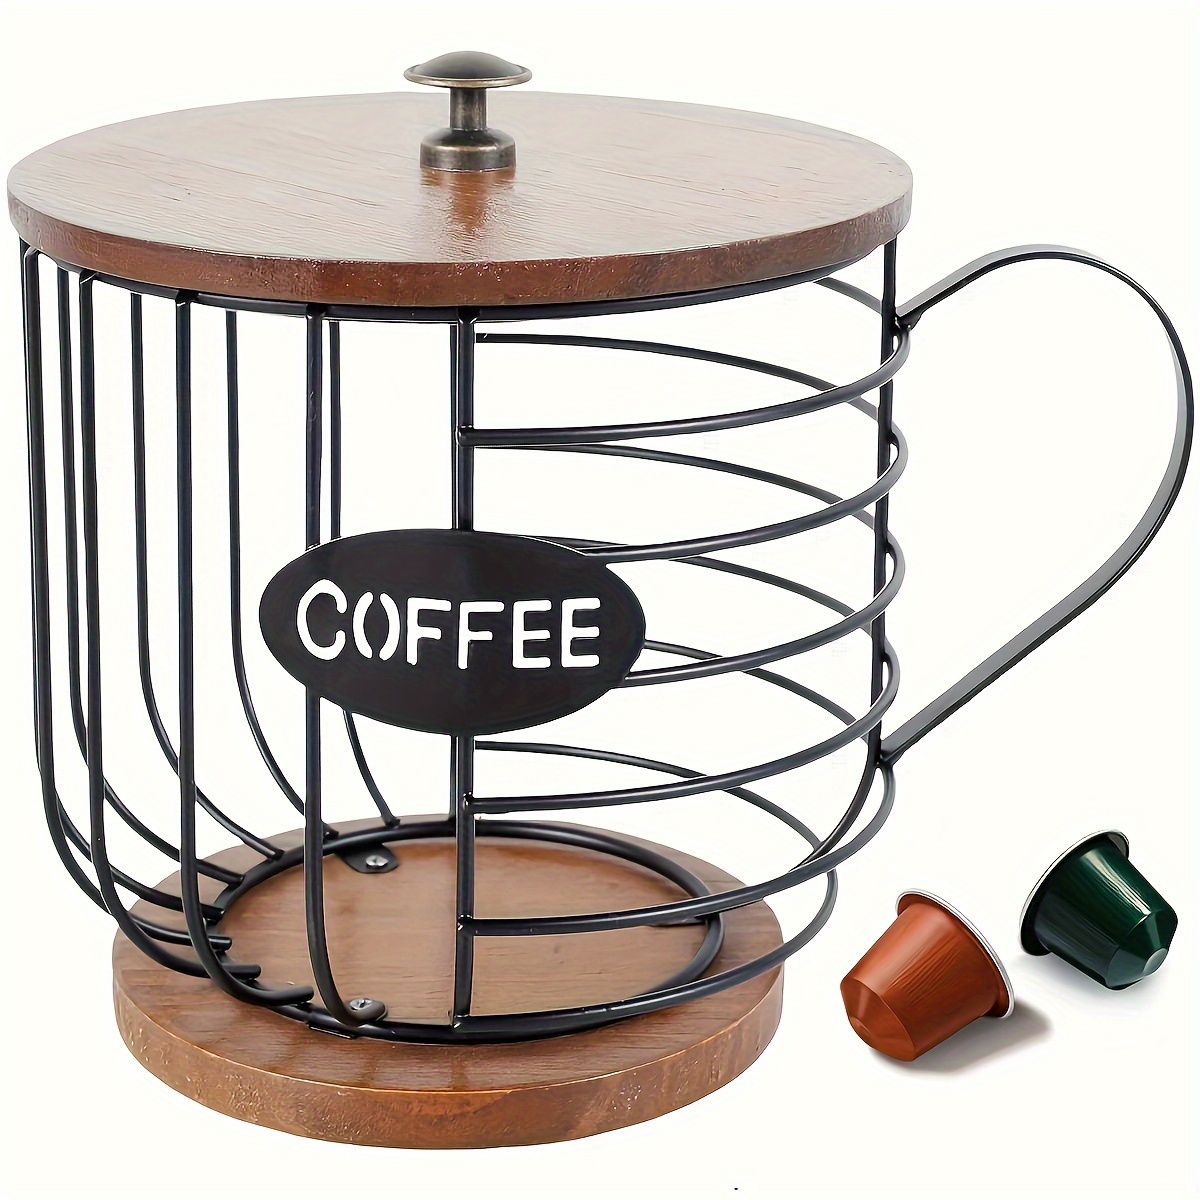 

1pc Coffee Pod Holder - Large Capacity Black Wire Cup Storage With Wooden Base - Modern Coffee Basket Decor For Kitchen Countertop For Pods & Espresso Capsules, Home Kitchen Supplies